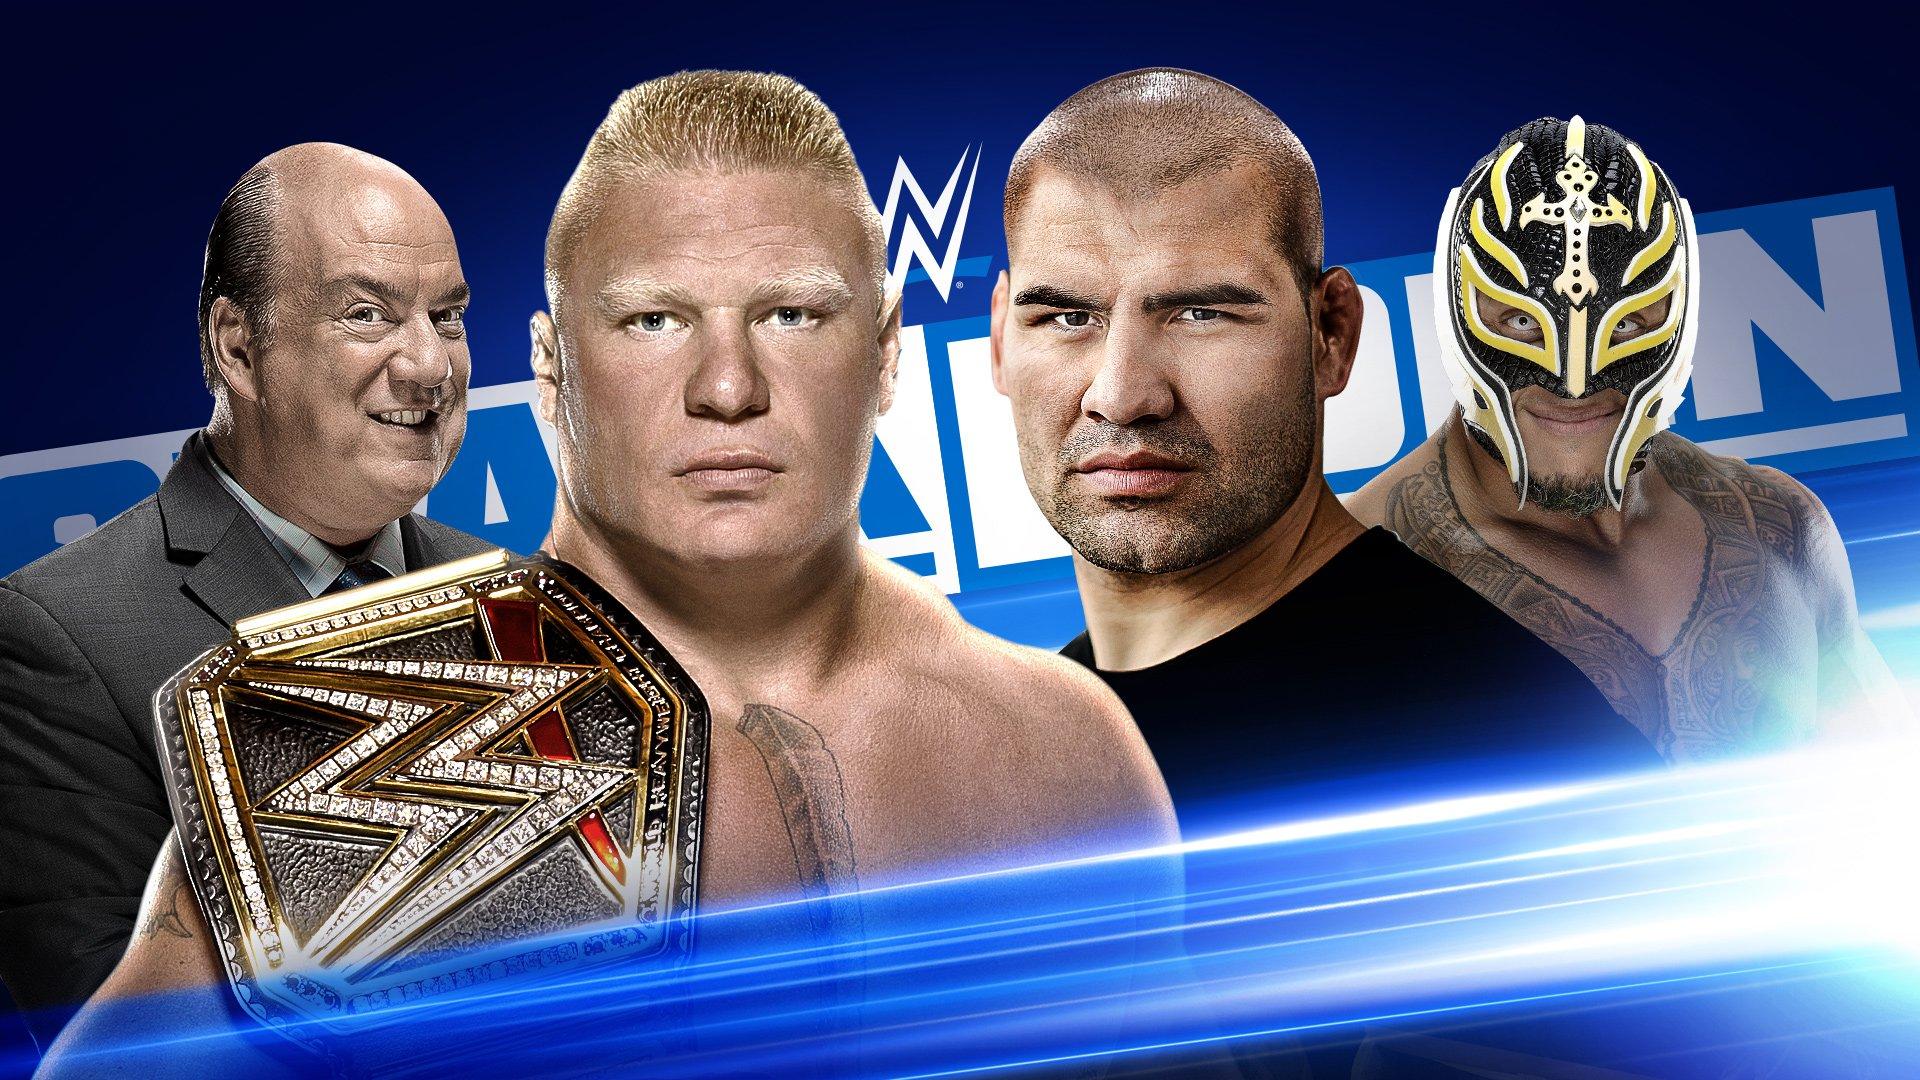 Confirmed Matches & Segments For WWE Friday Night SmackDown This Week